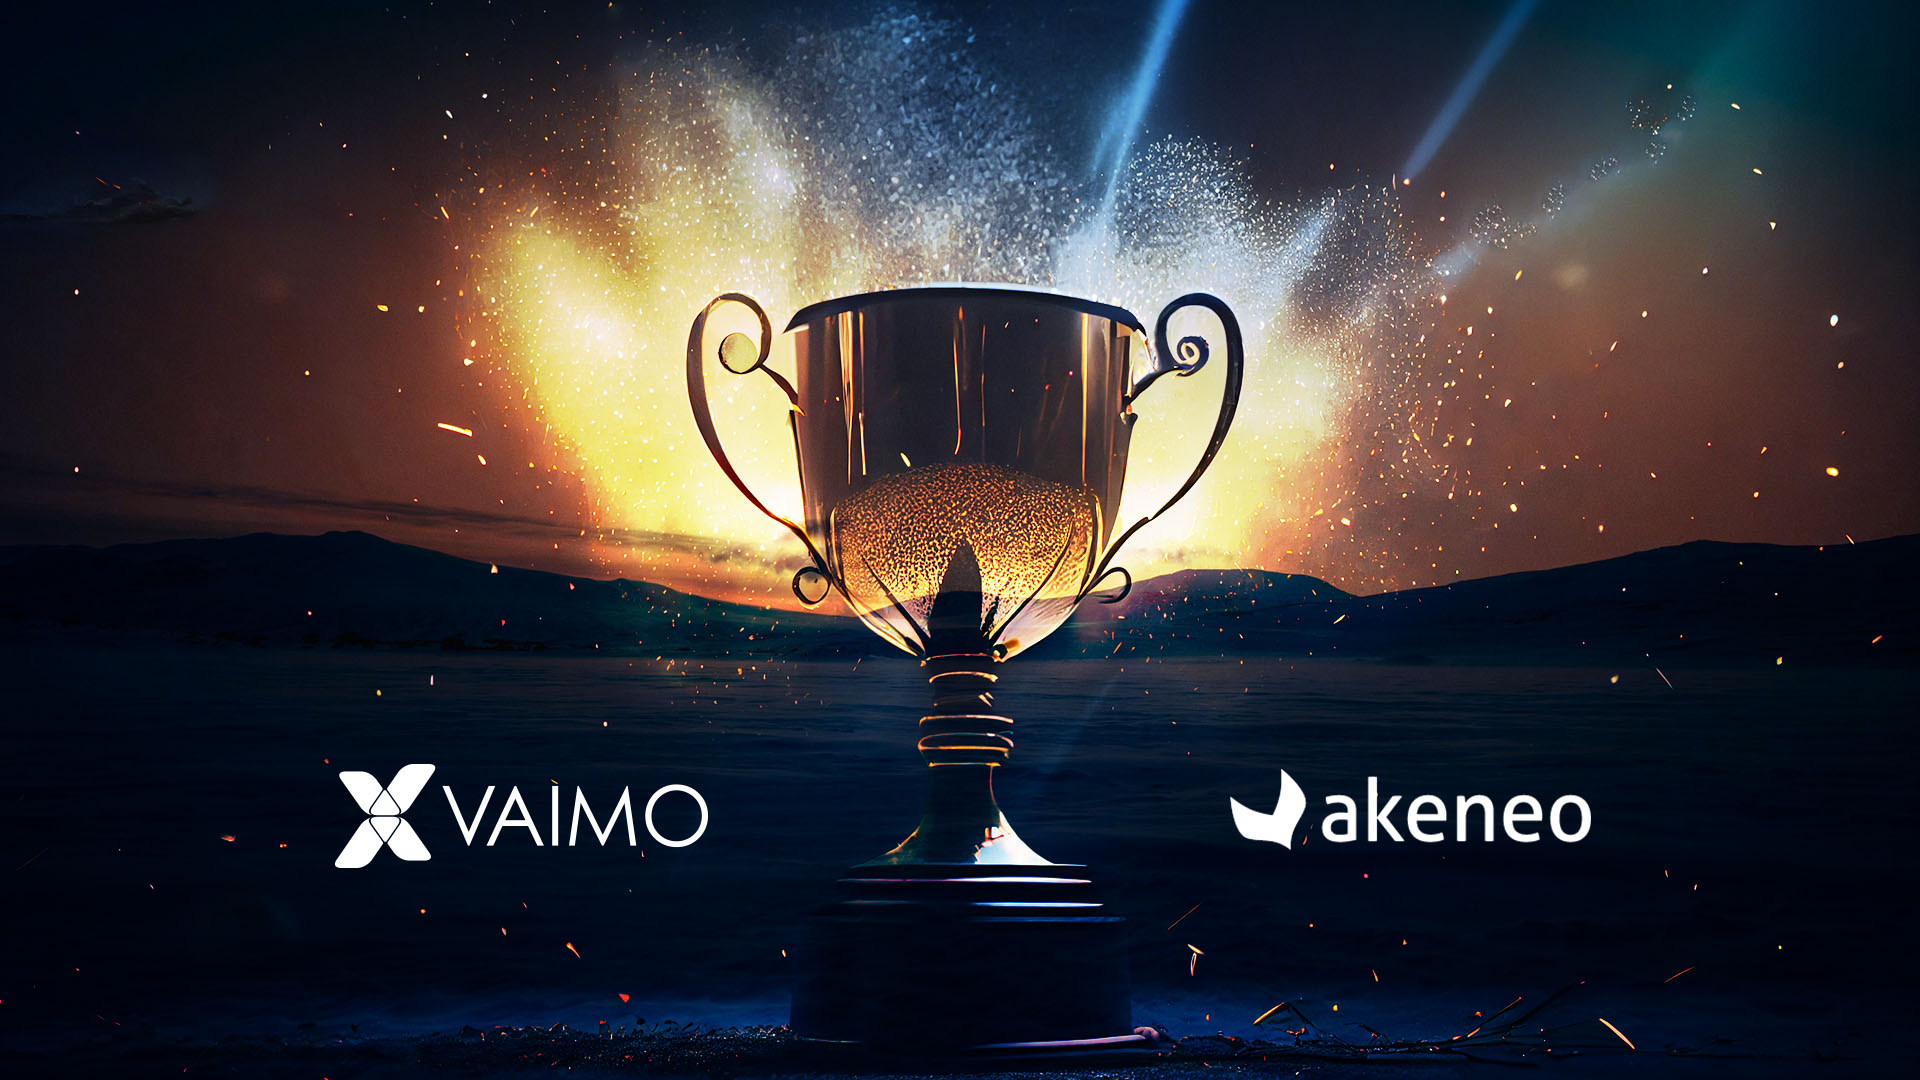 Abstract image with award in center and Vaimo and Akeneo logos surrounding it.